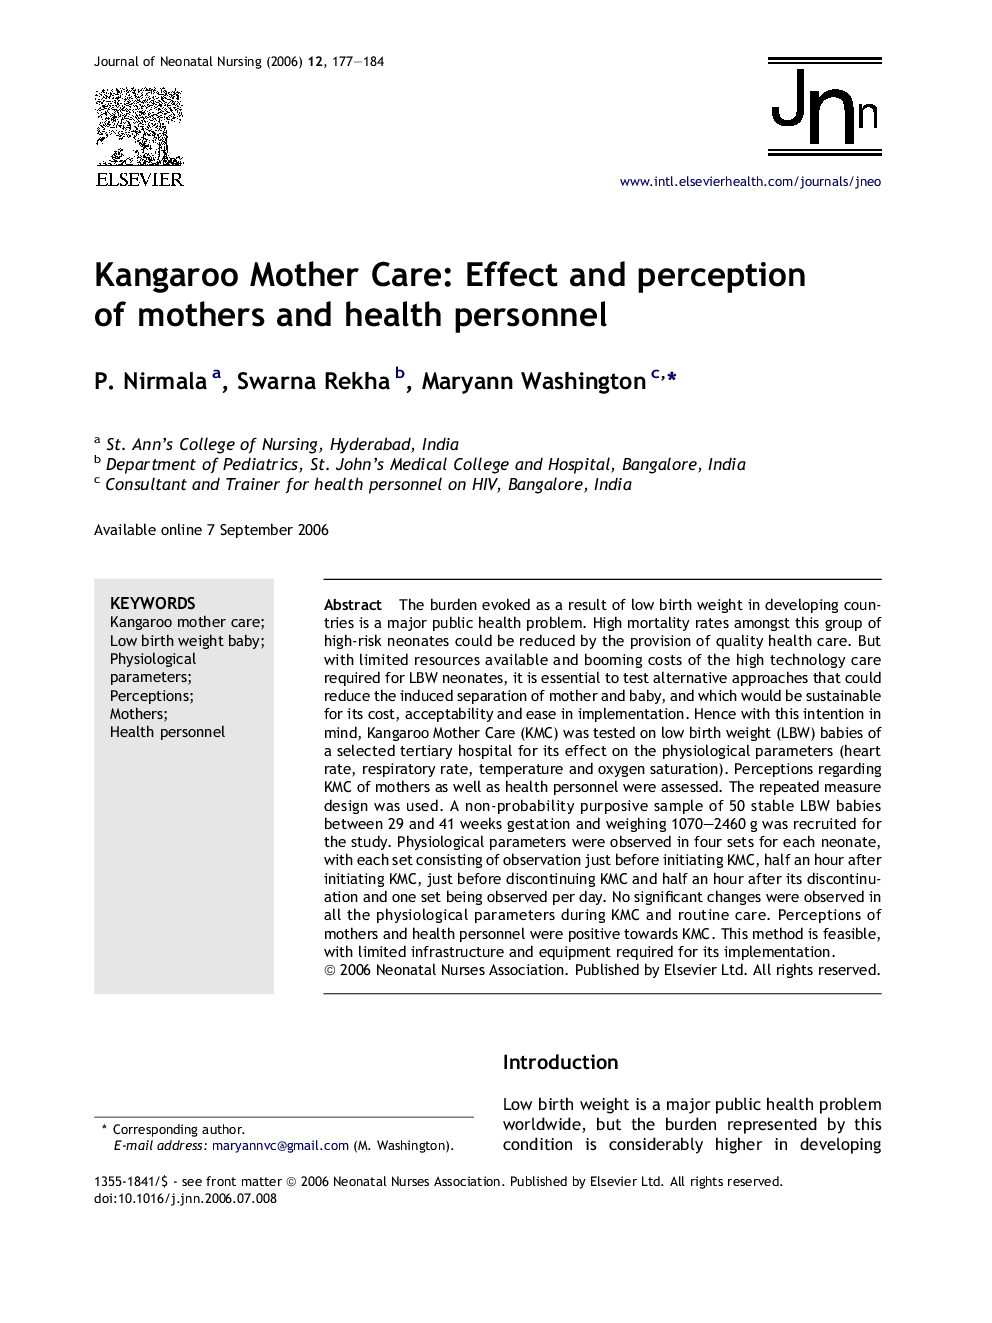 Kangaroo Mother Care: Effect and perception of mothers and health personnel